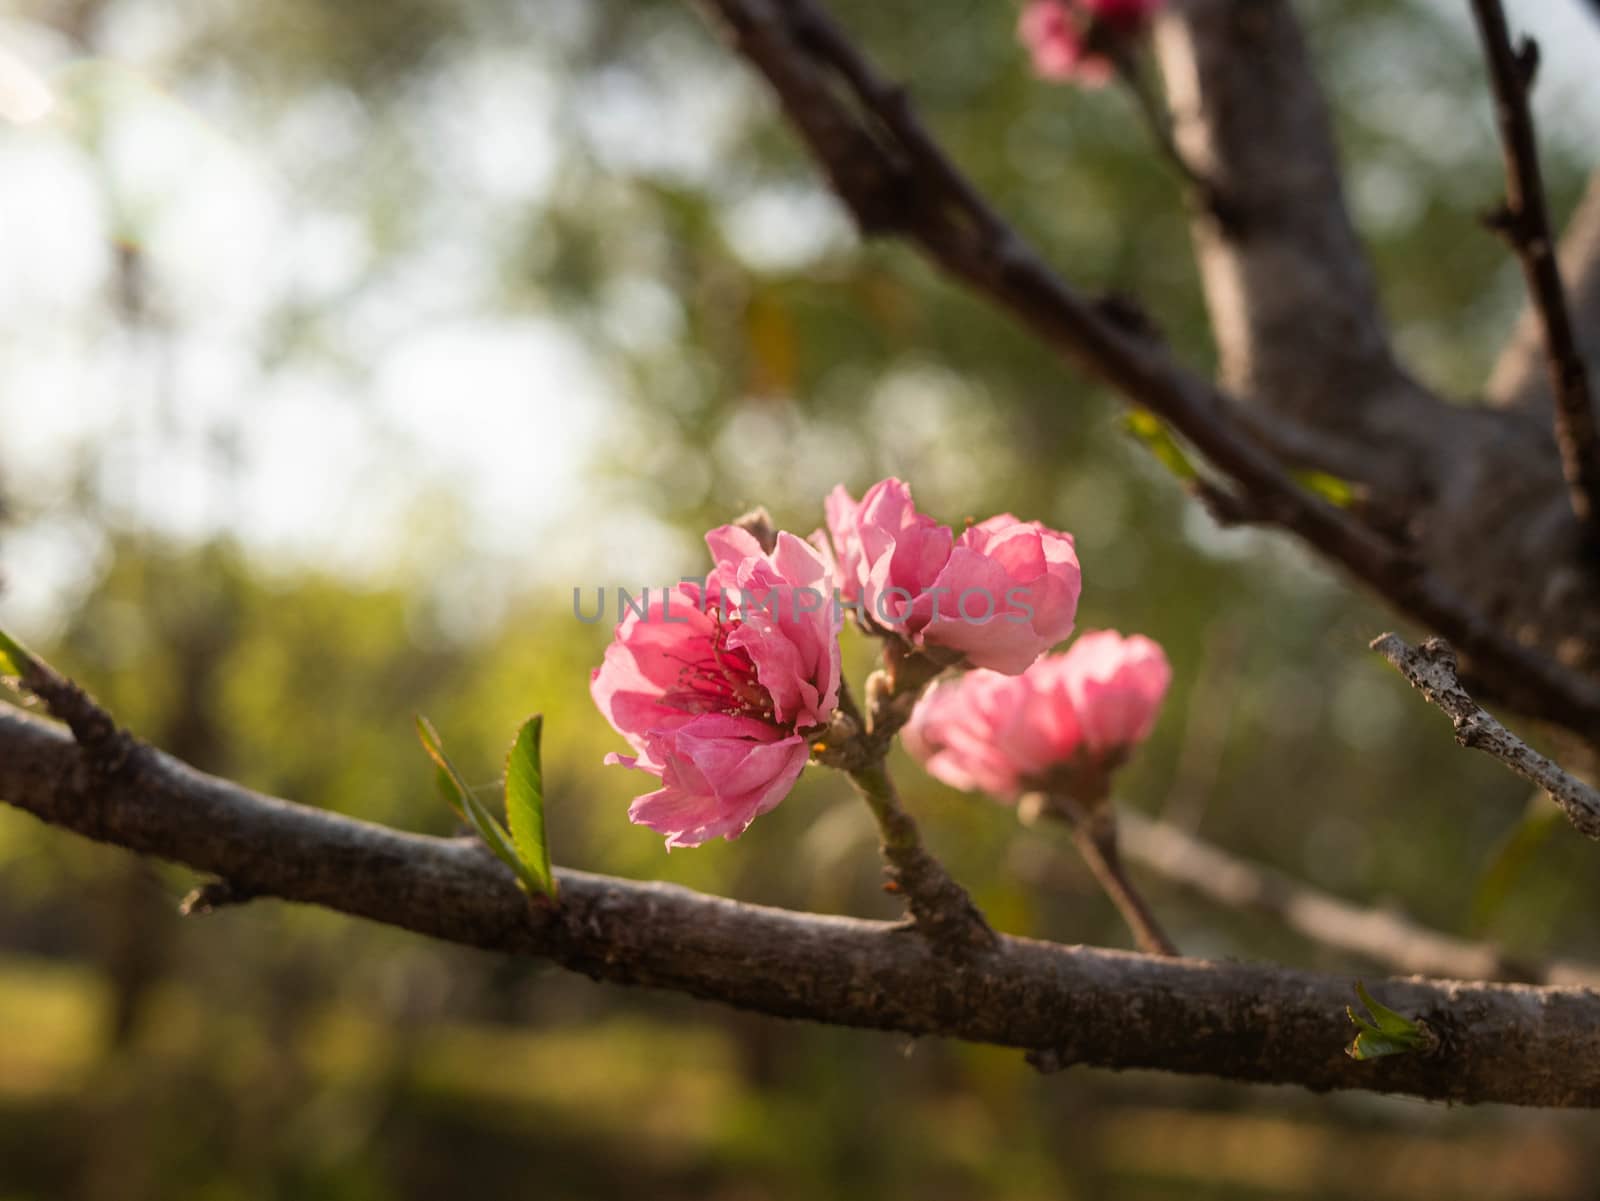 Pink peach blossom on branch in the park.